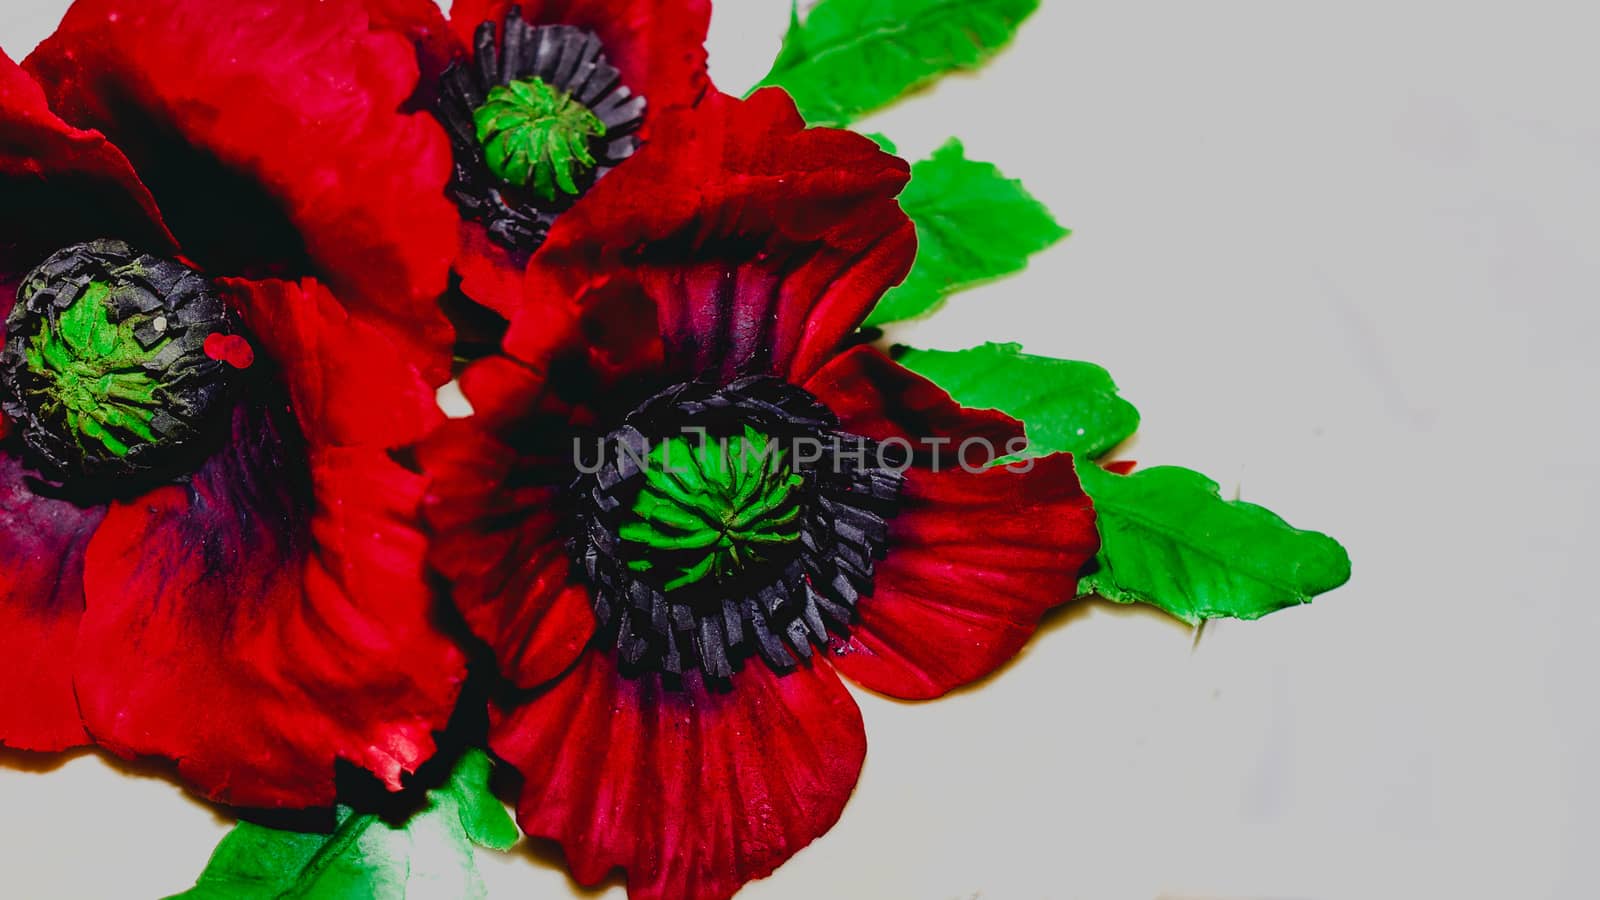 red poppies-white cake decoration by alexandr_sorokin